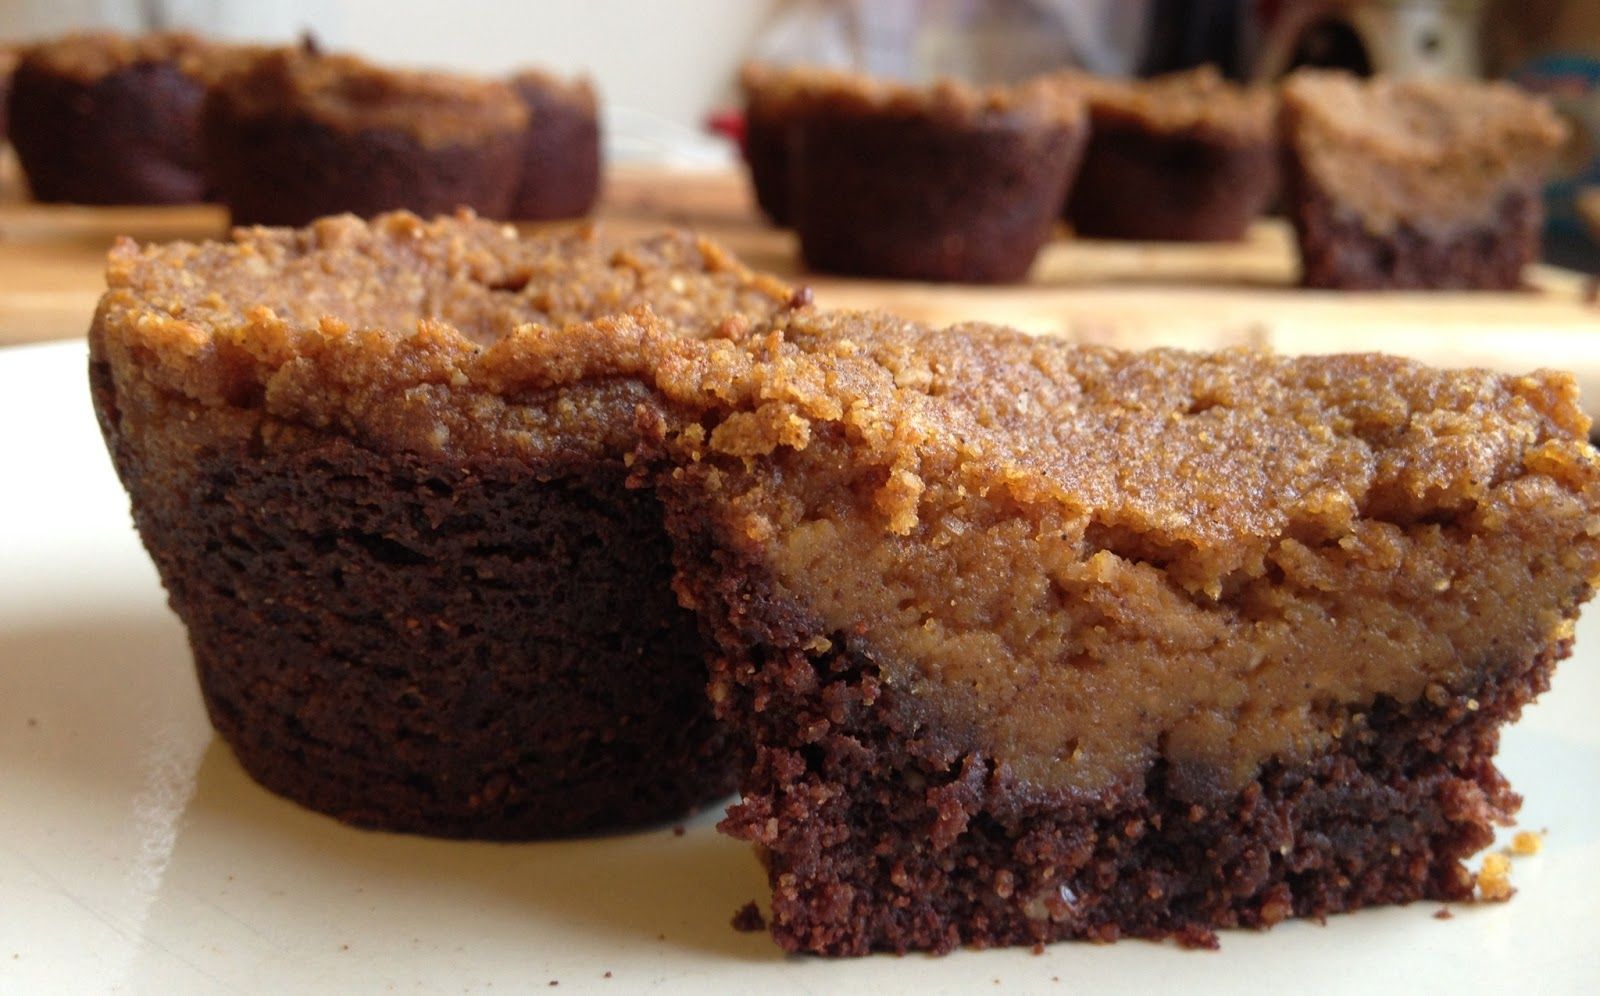 Omg cannot stop eating these brownies- and they have no carbs, sugar, grains or